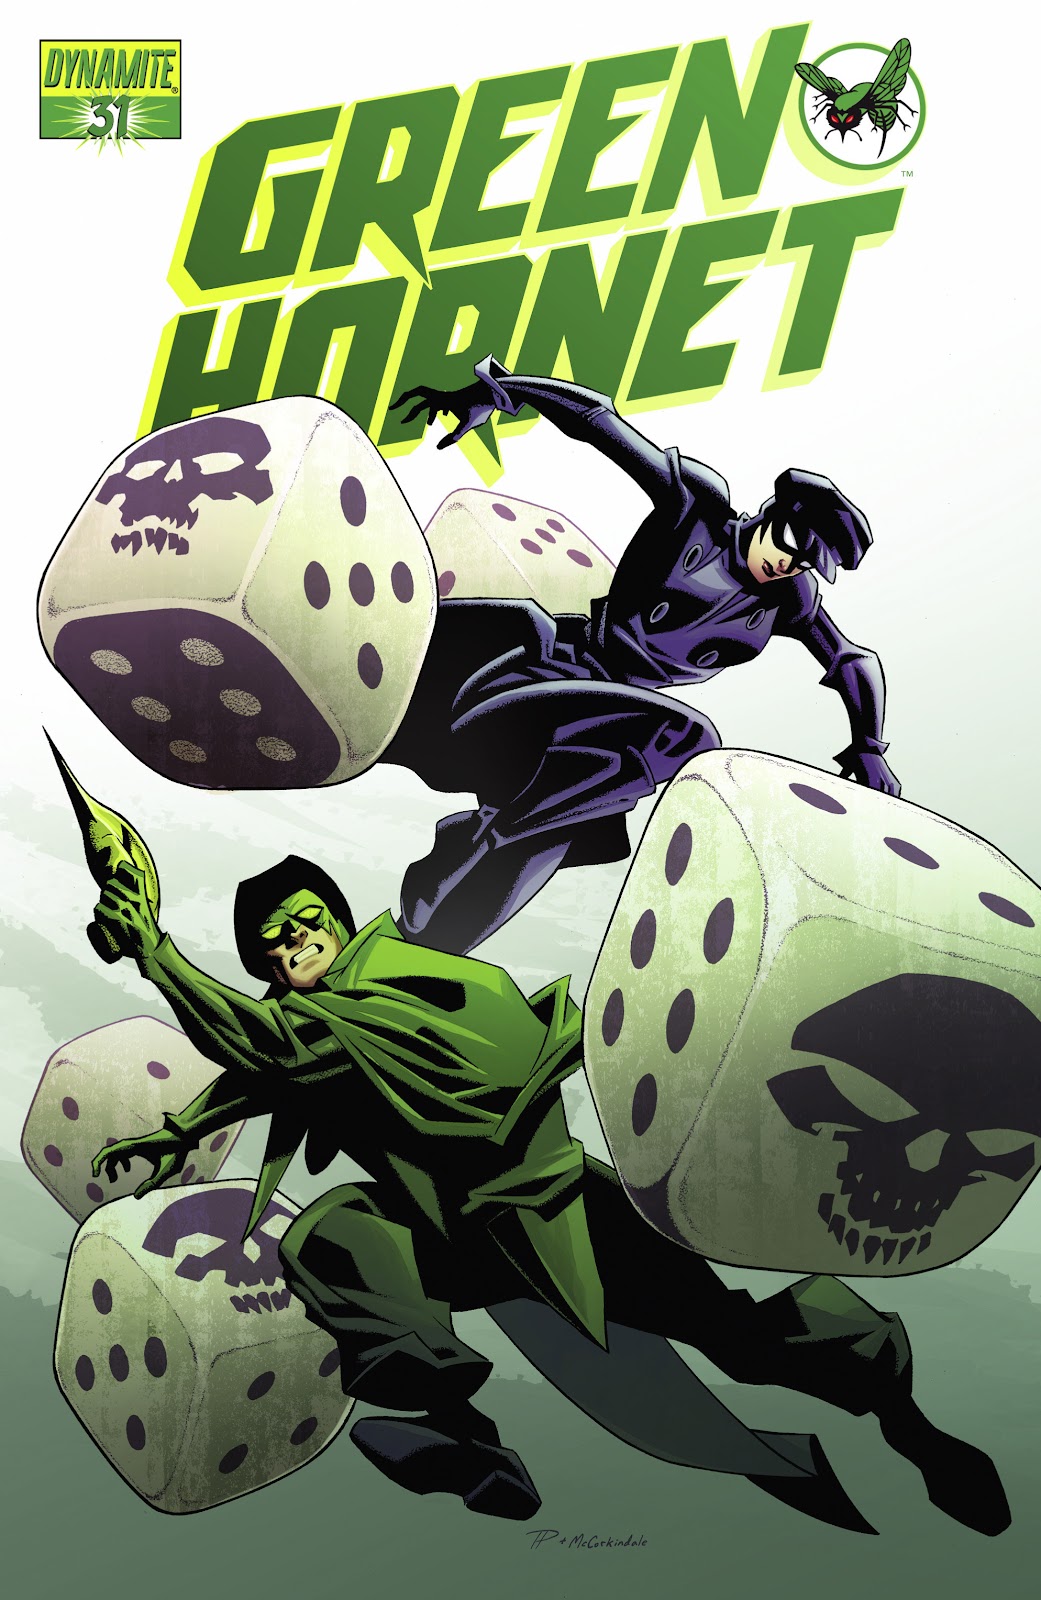 Green Hornet (2010) issue 31 - Page 1